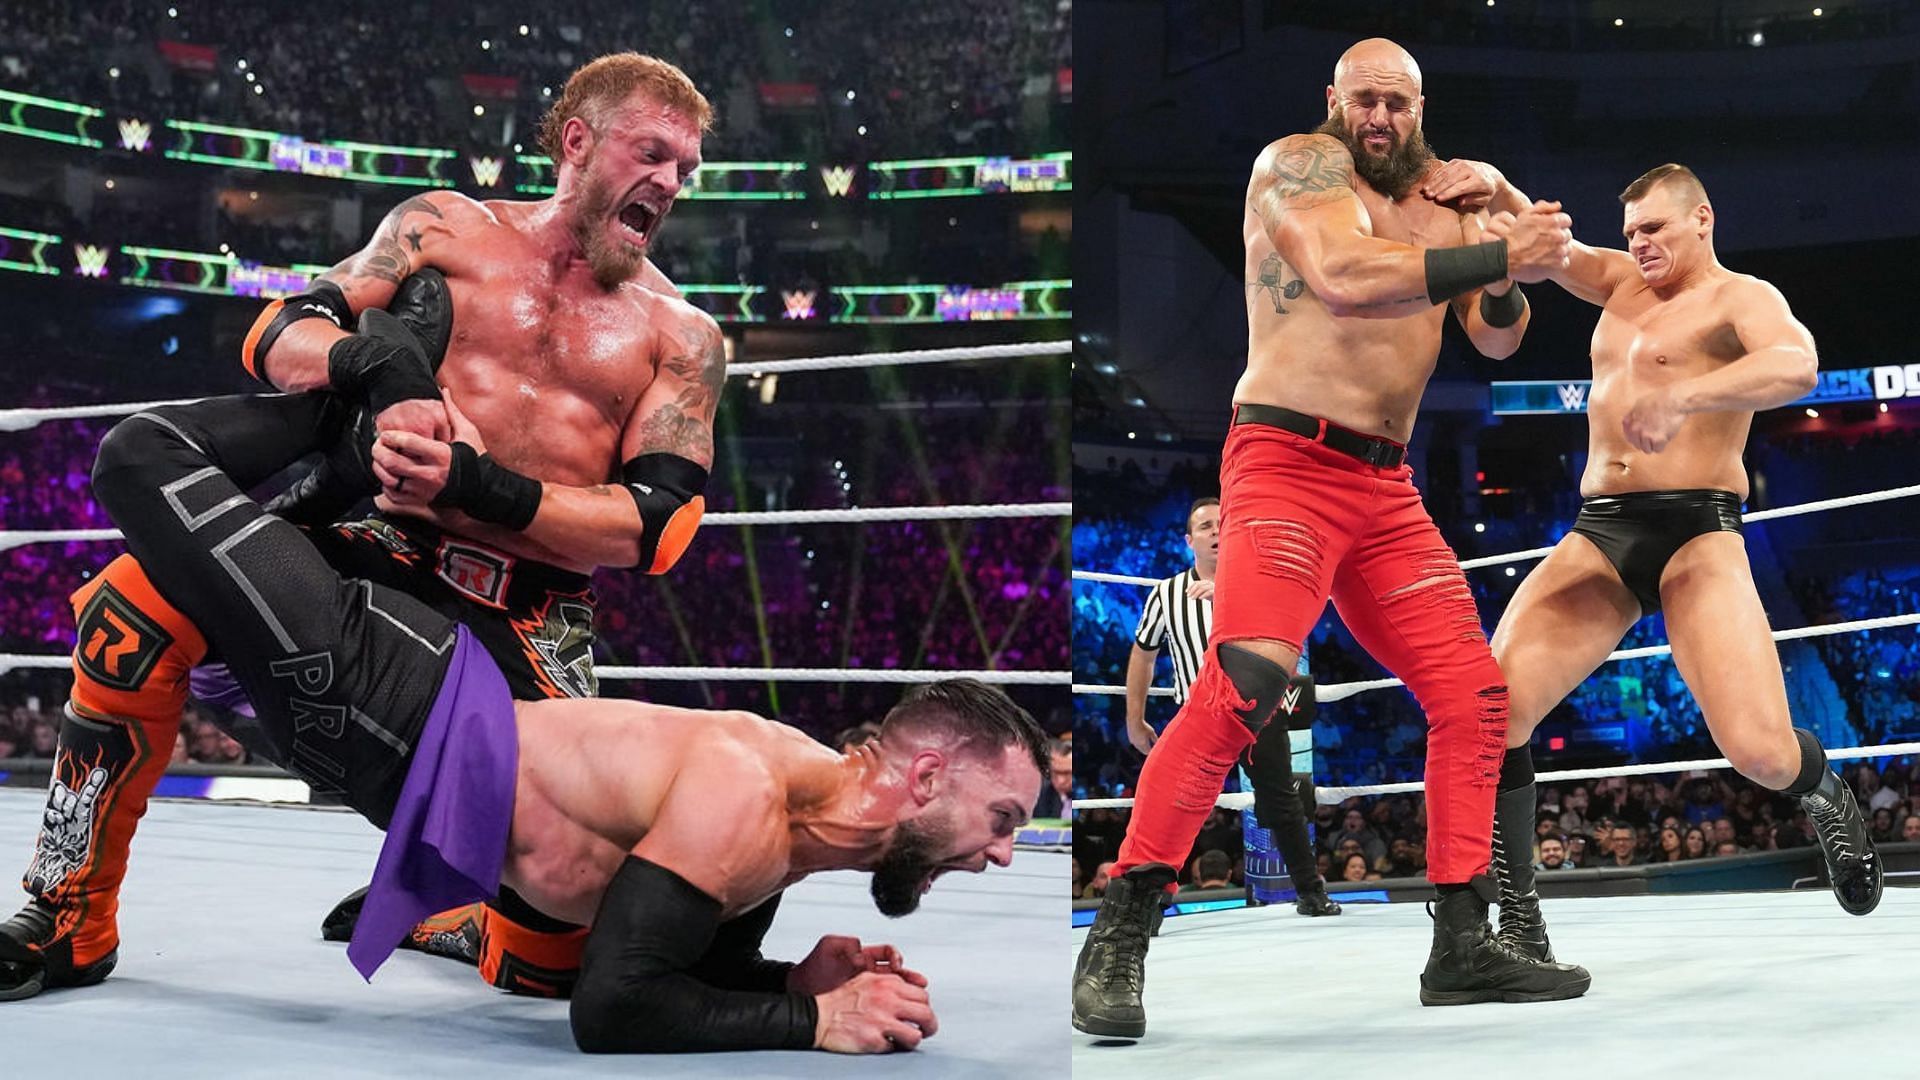 Royal Rumble 2023 will witness some incredible undercard matches